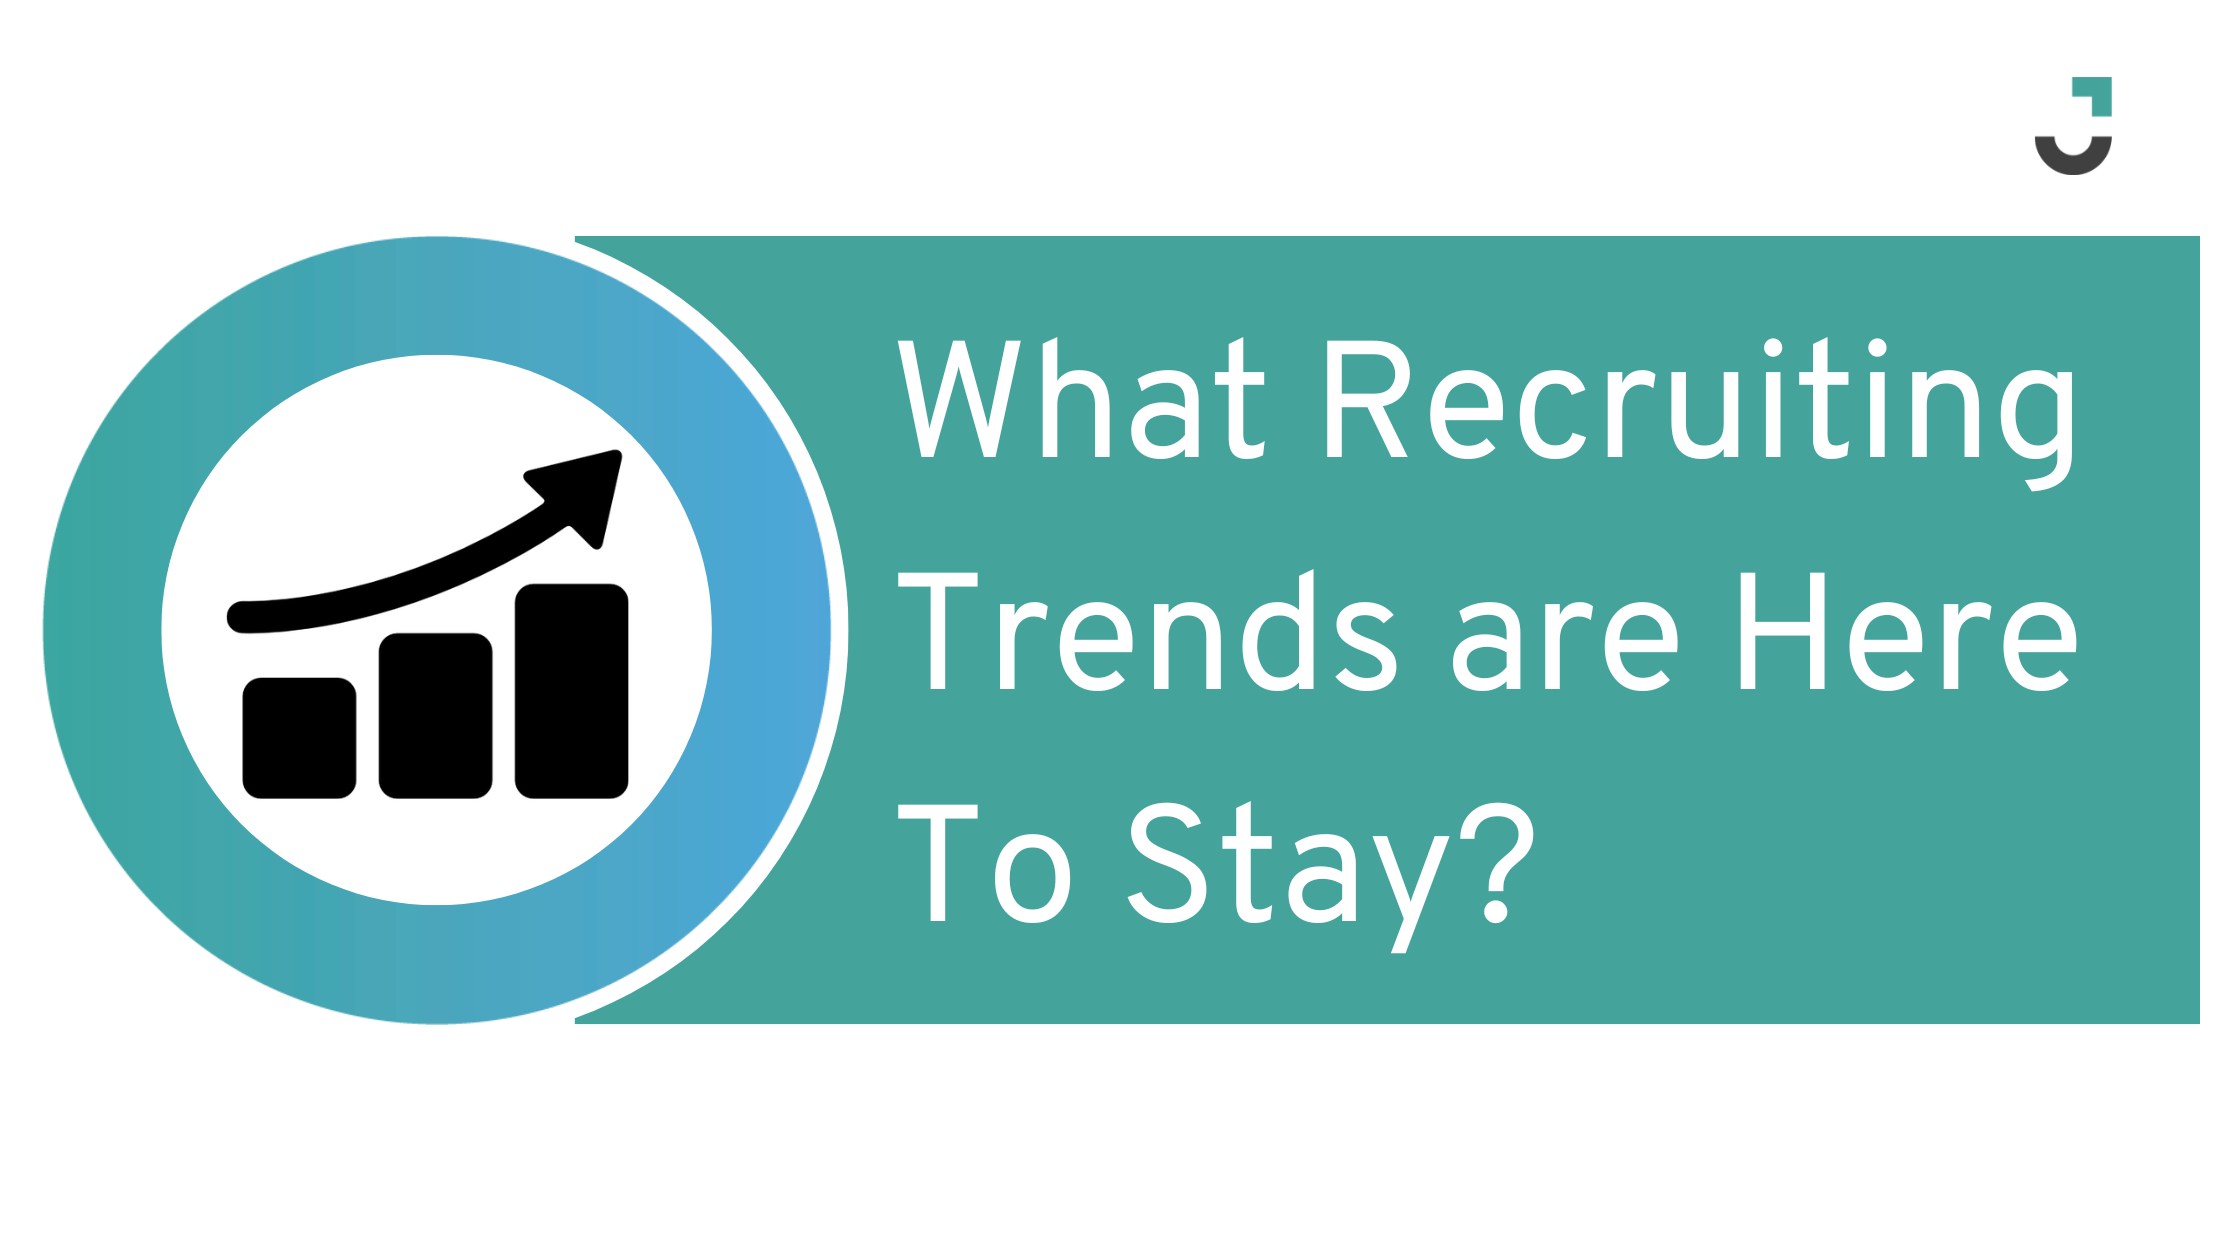 What Recruiting Trends are Here To Stay?